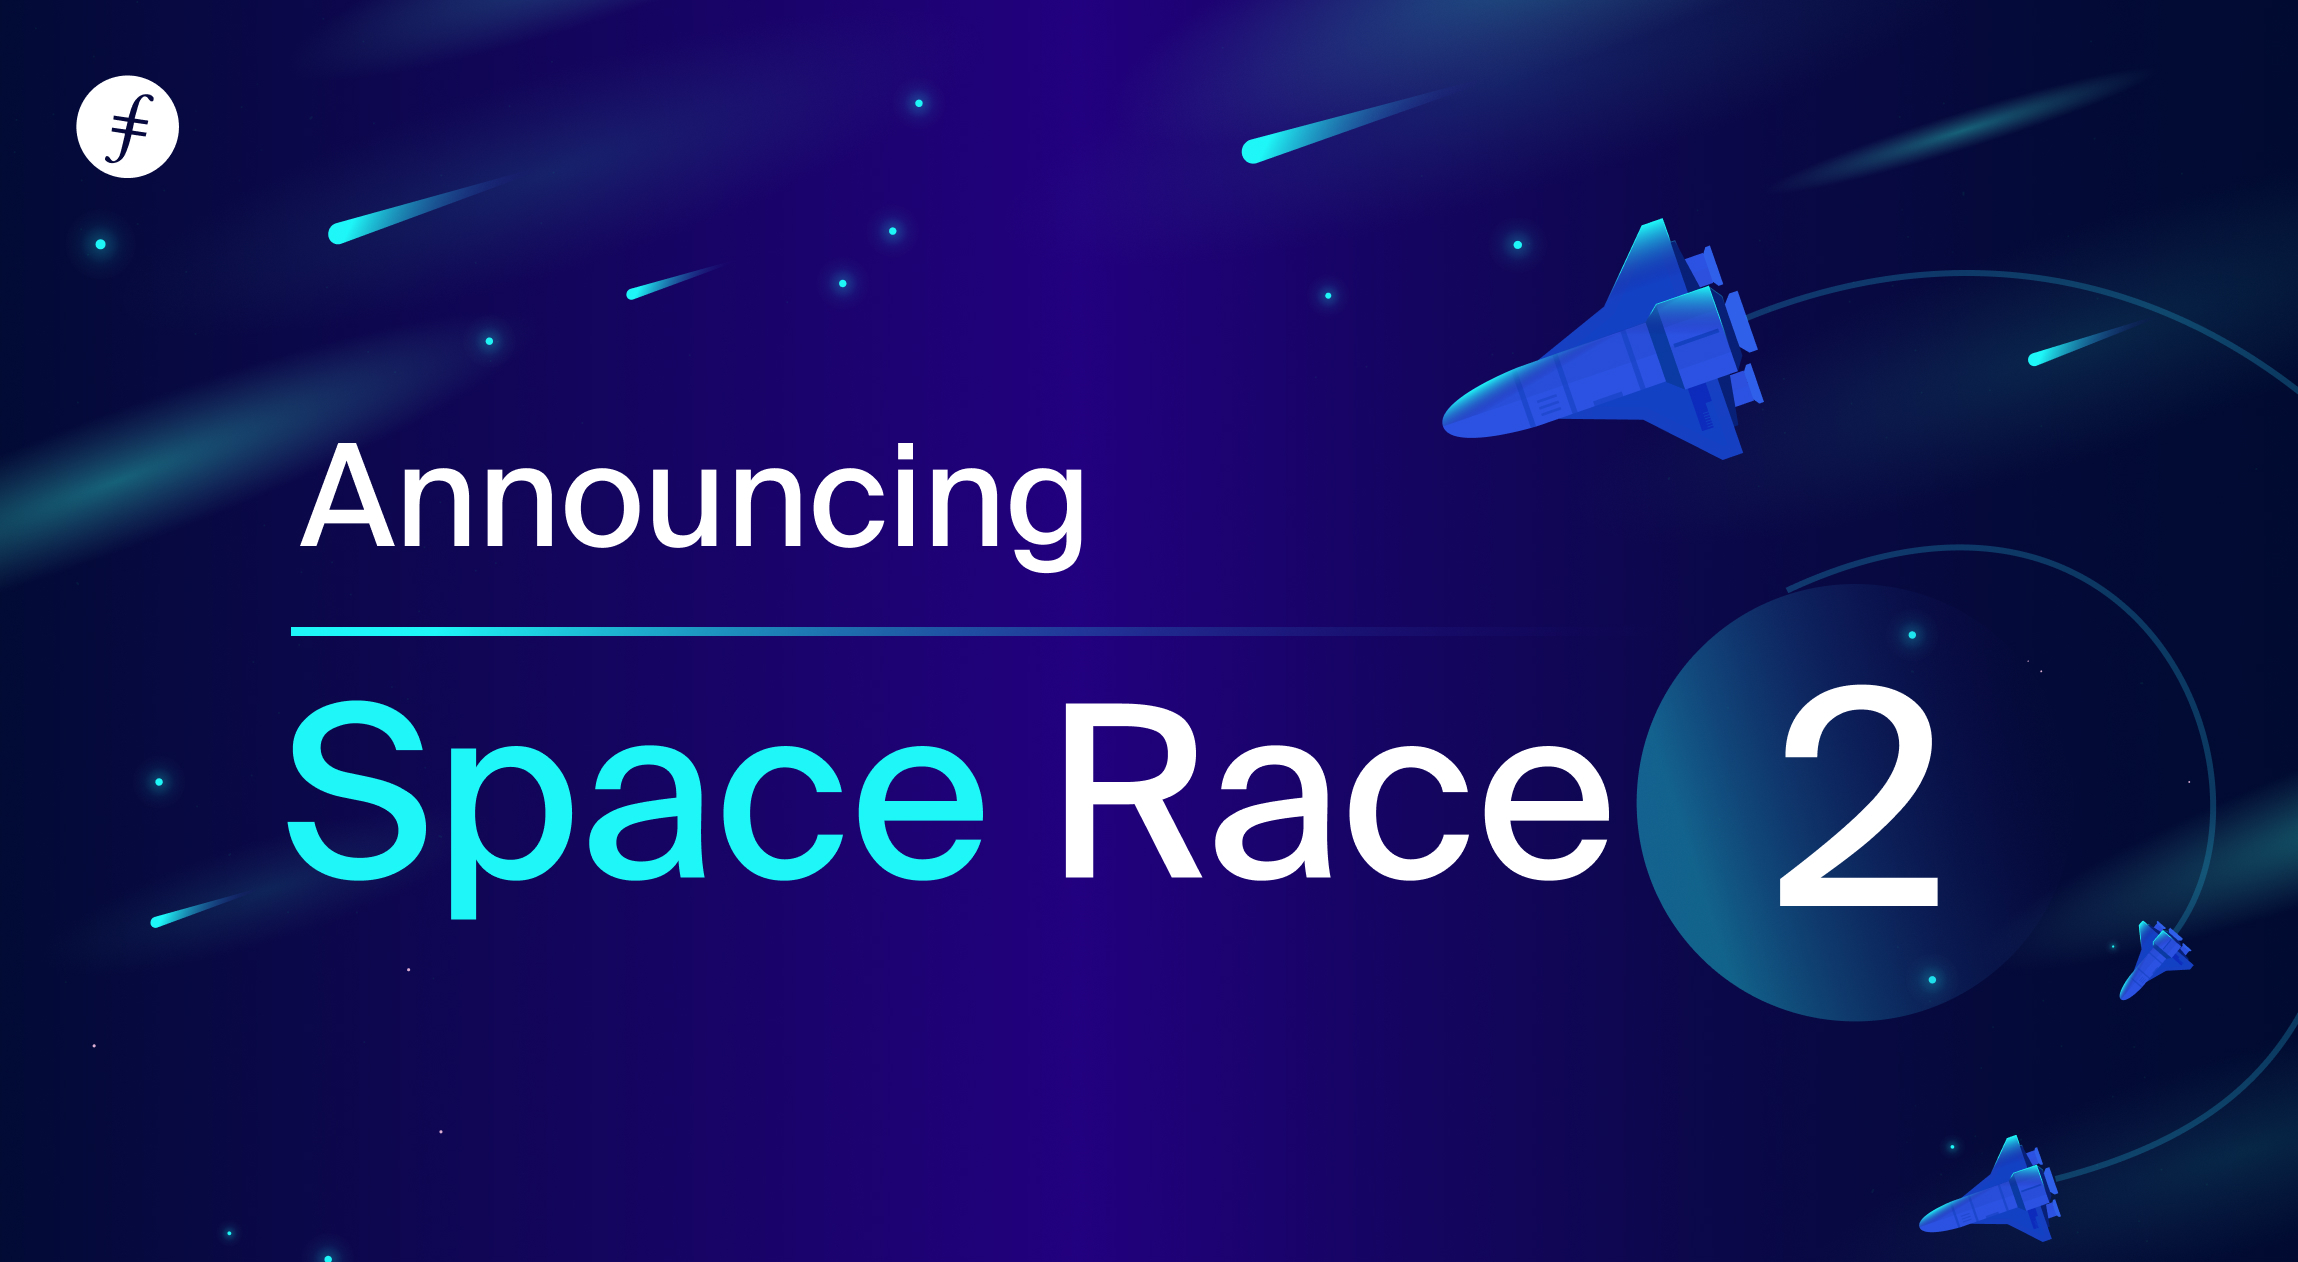 Announcing Space Race 2